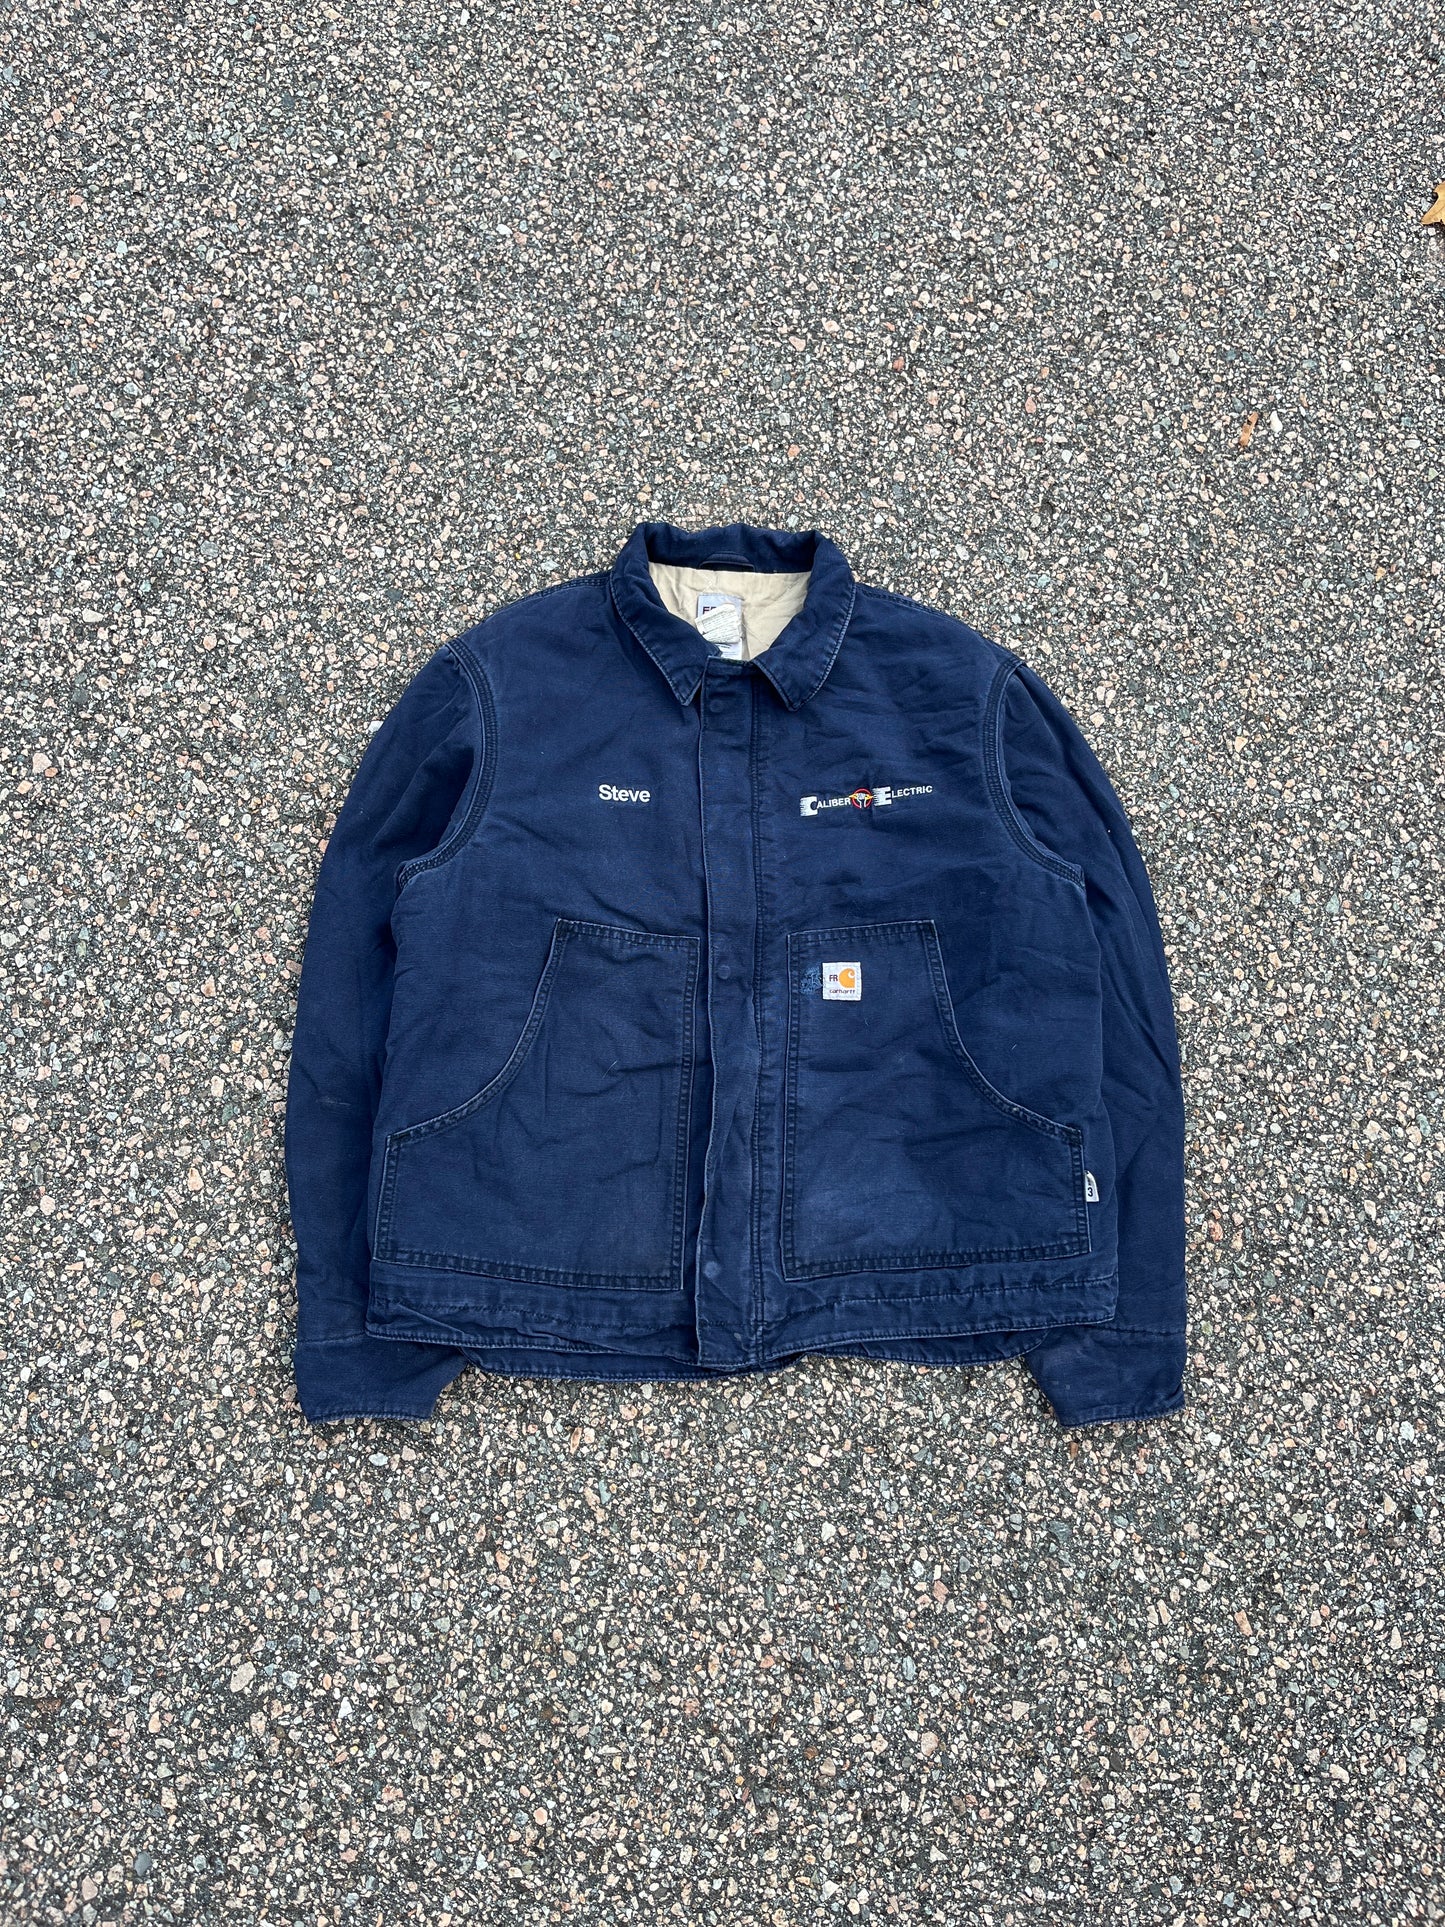 Faded Navy Blue Fire Resistant Carhartt Arctic Style Jacket - Large